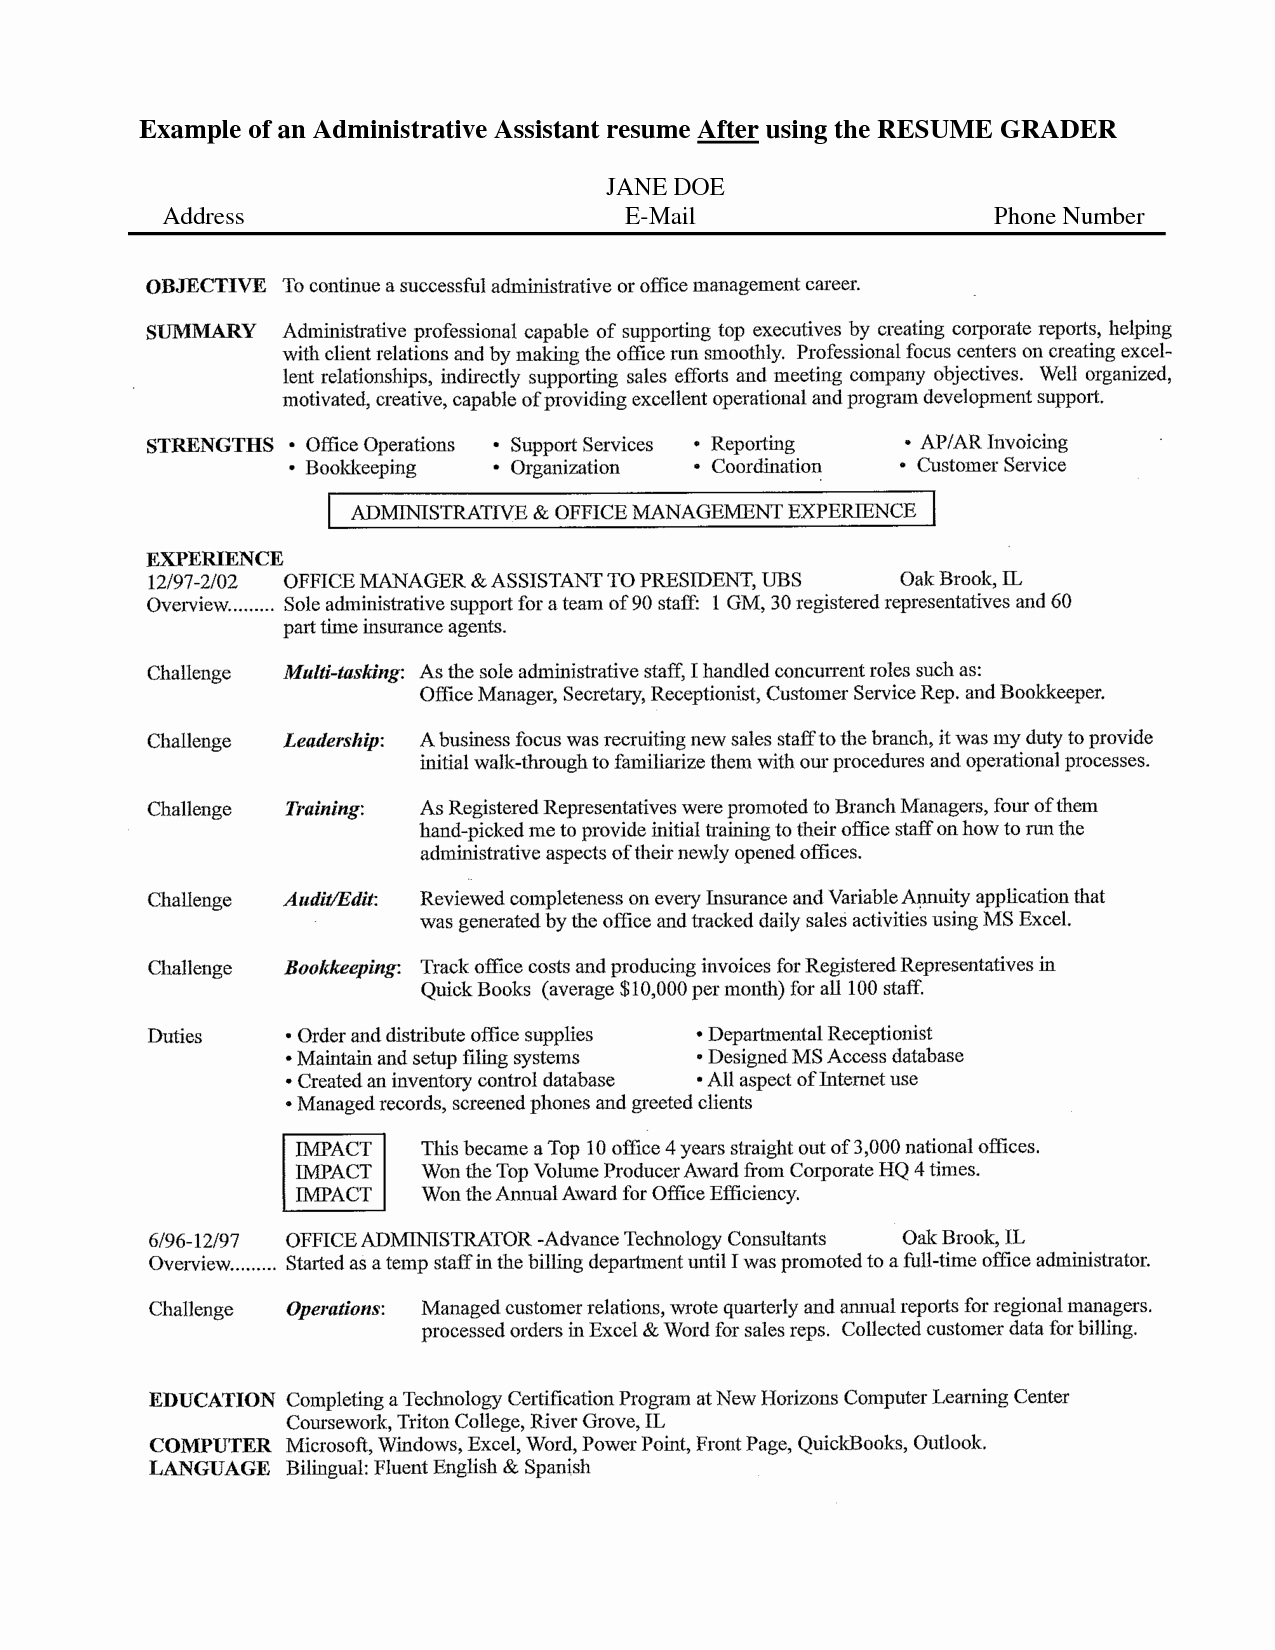 Personal assistant Resume Objective Administrative Ficer